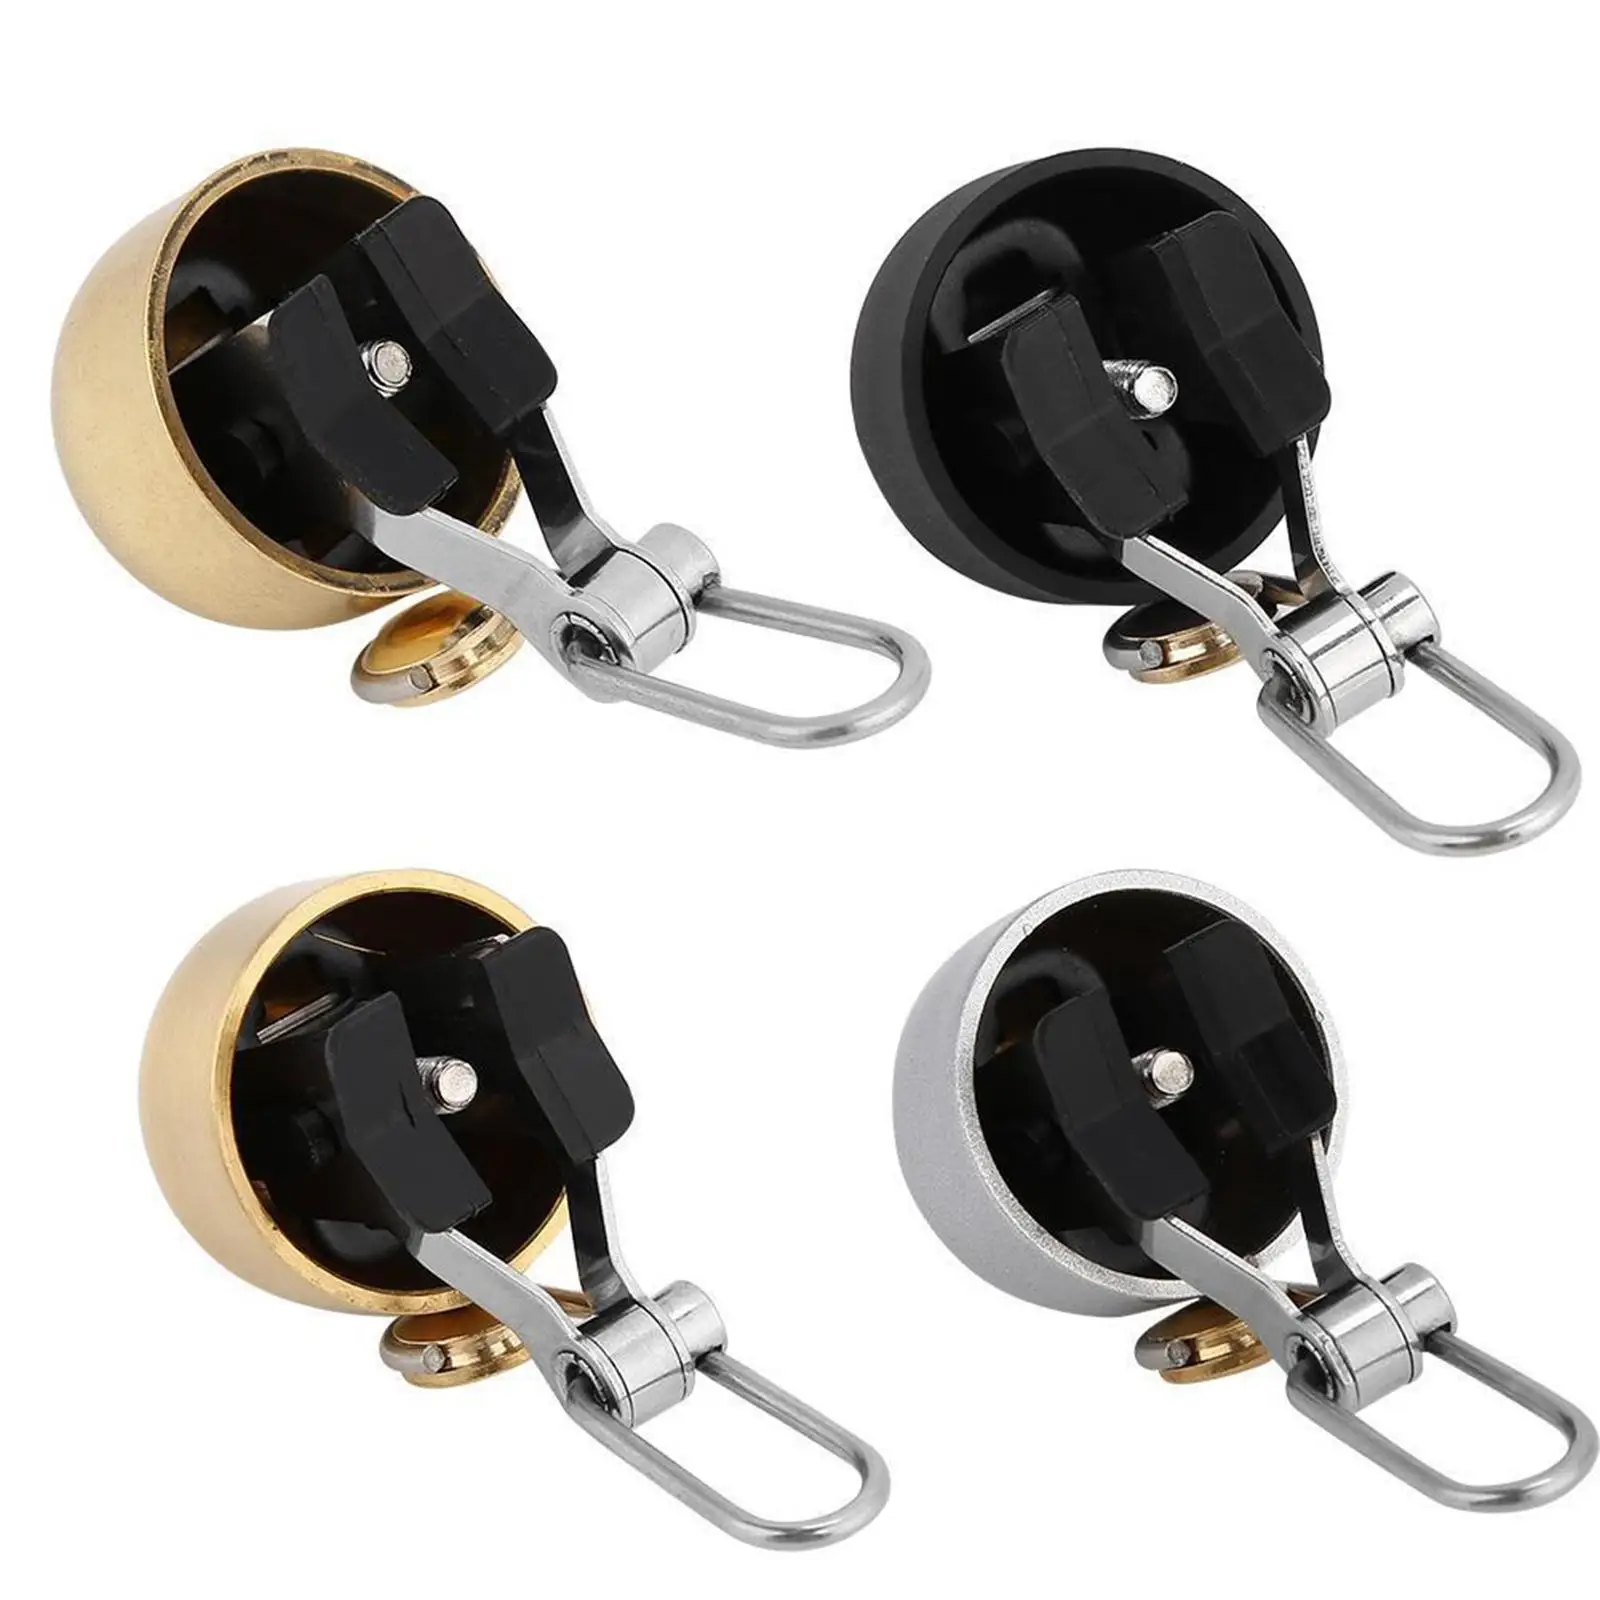  Bike Bells Adults Handlebars Mounted Clear Loud Riding Safety Bicycle Bell